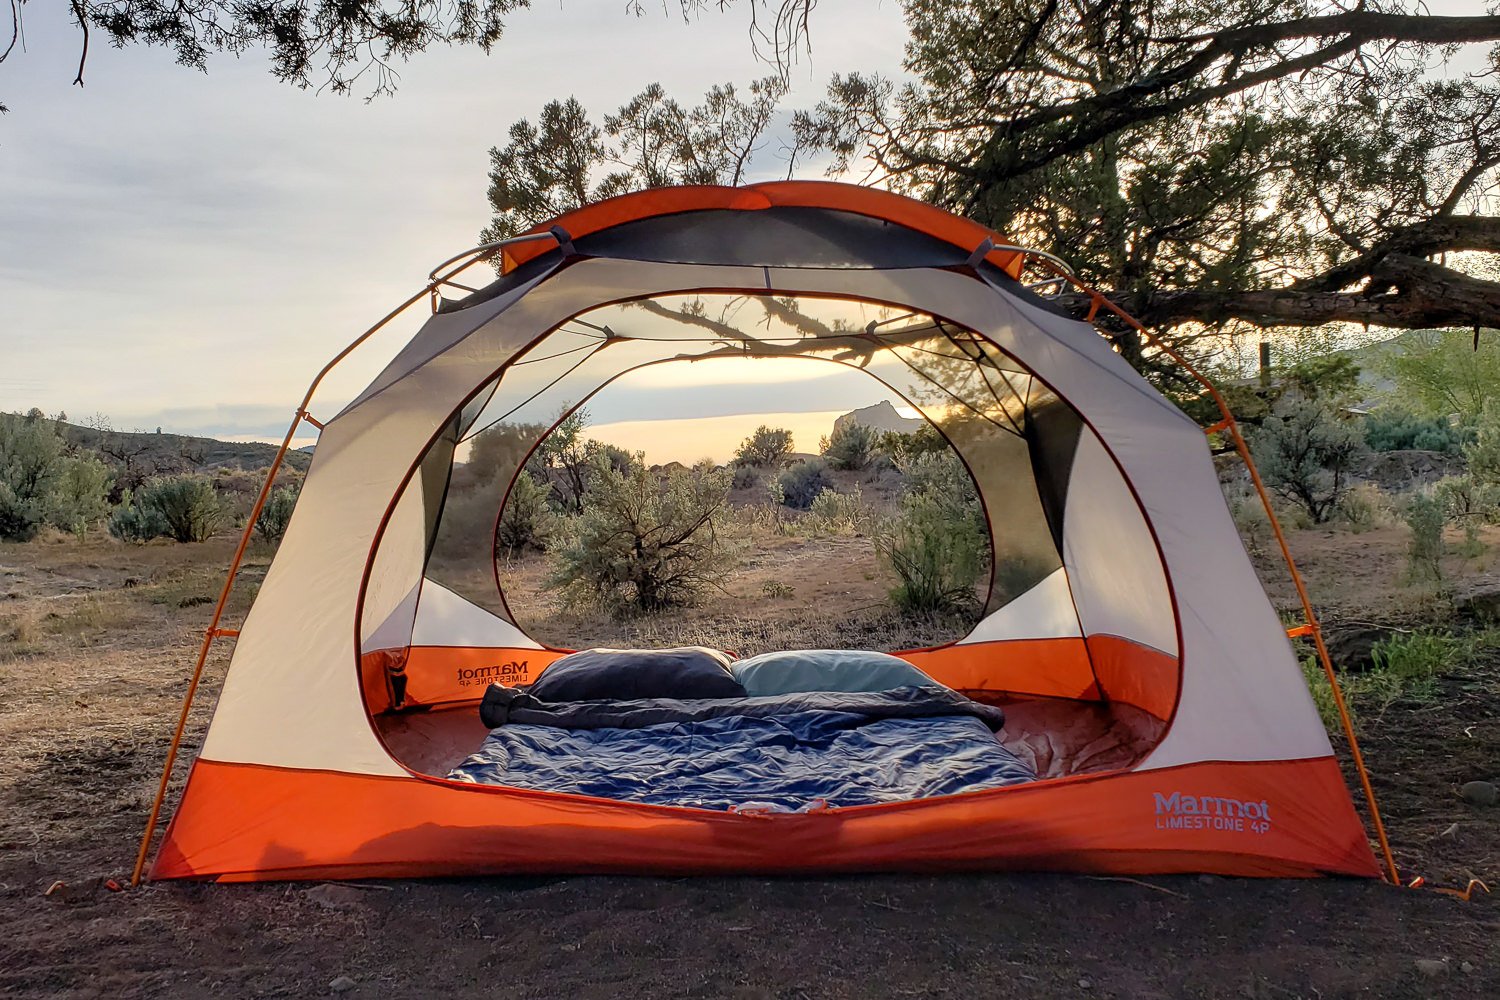 The Marmot Limestone 4P tent pitched under the partial shade of a tree